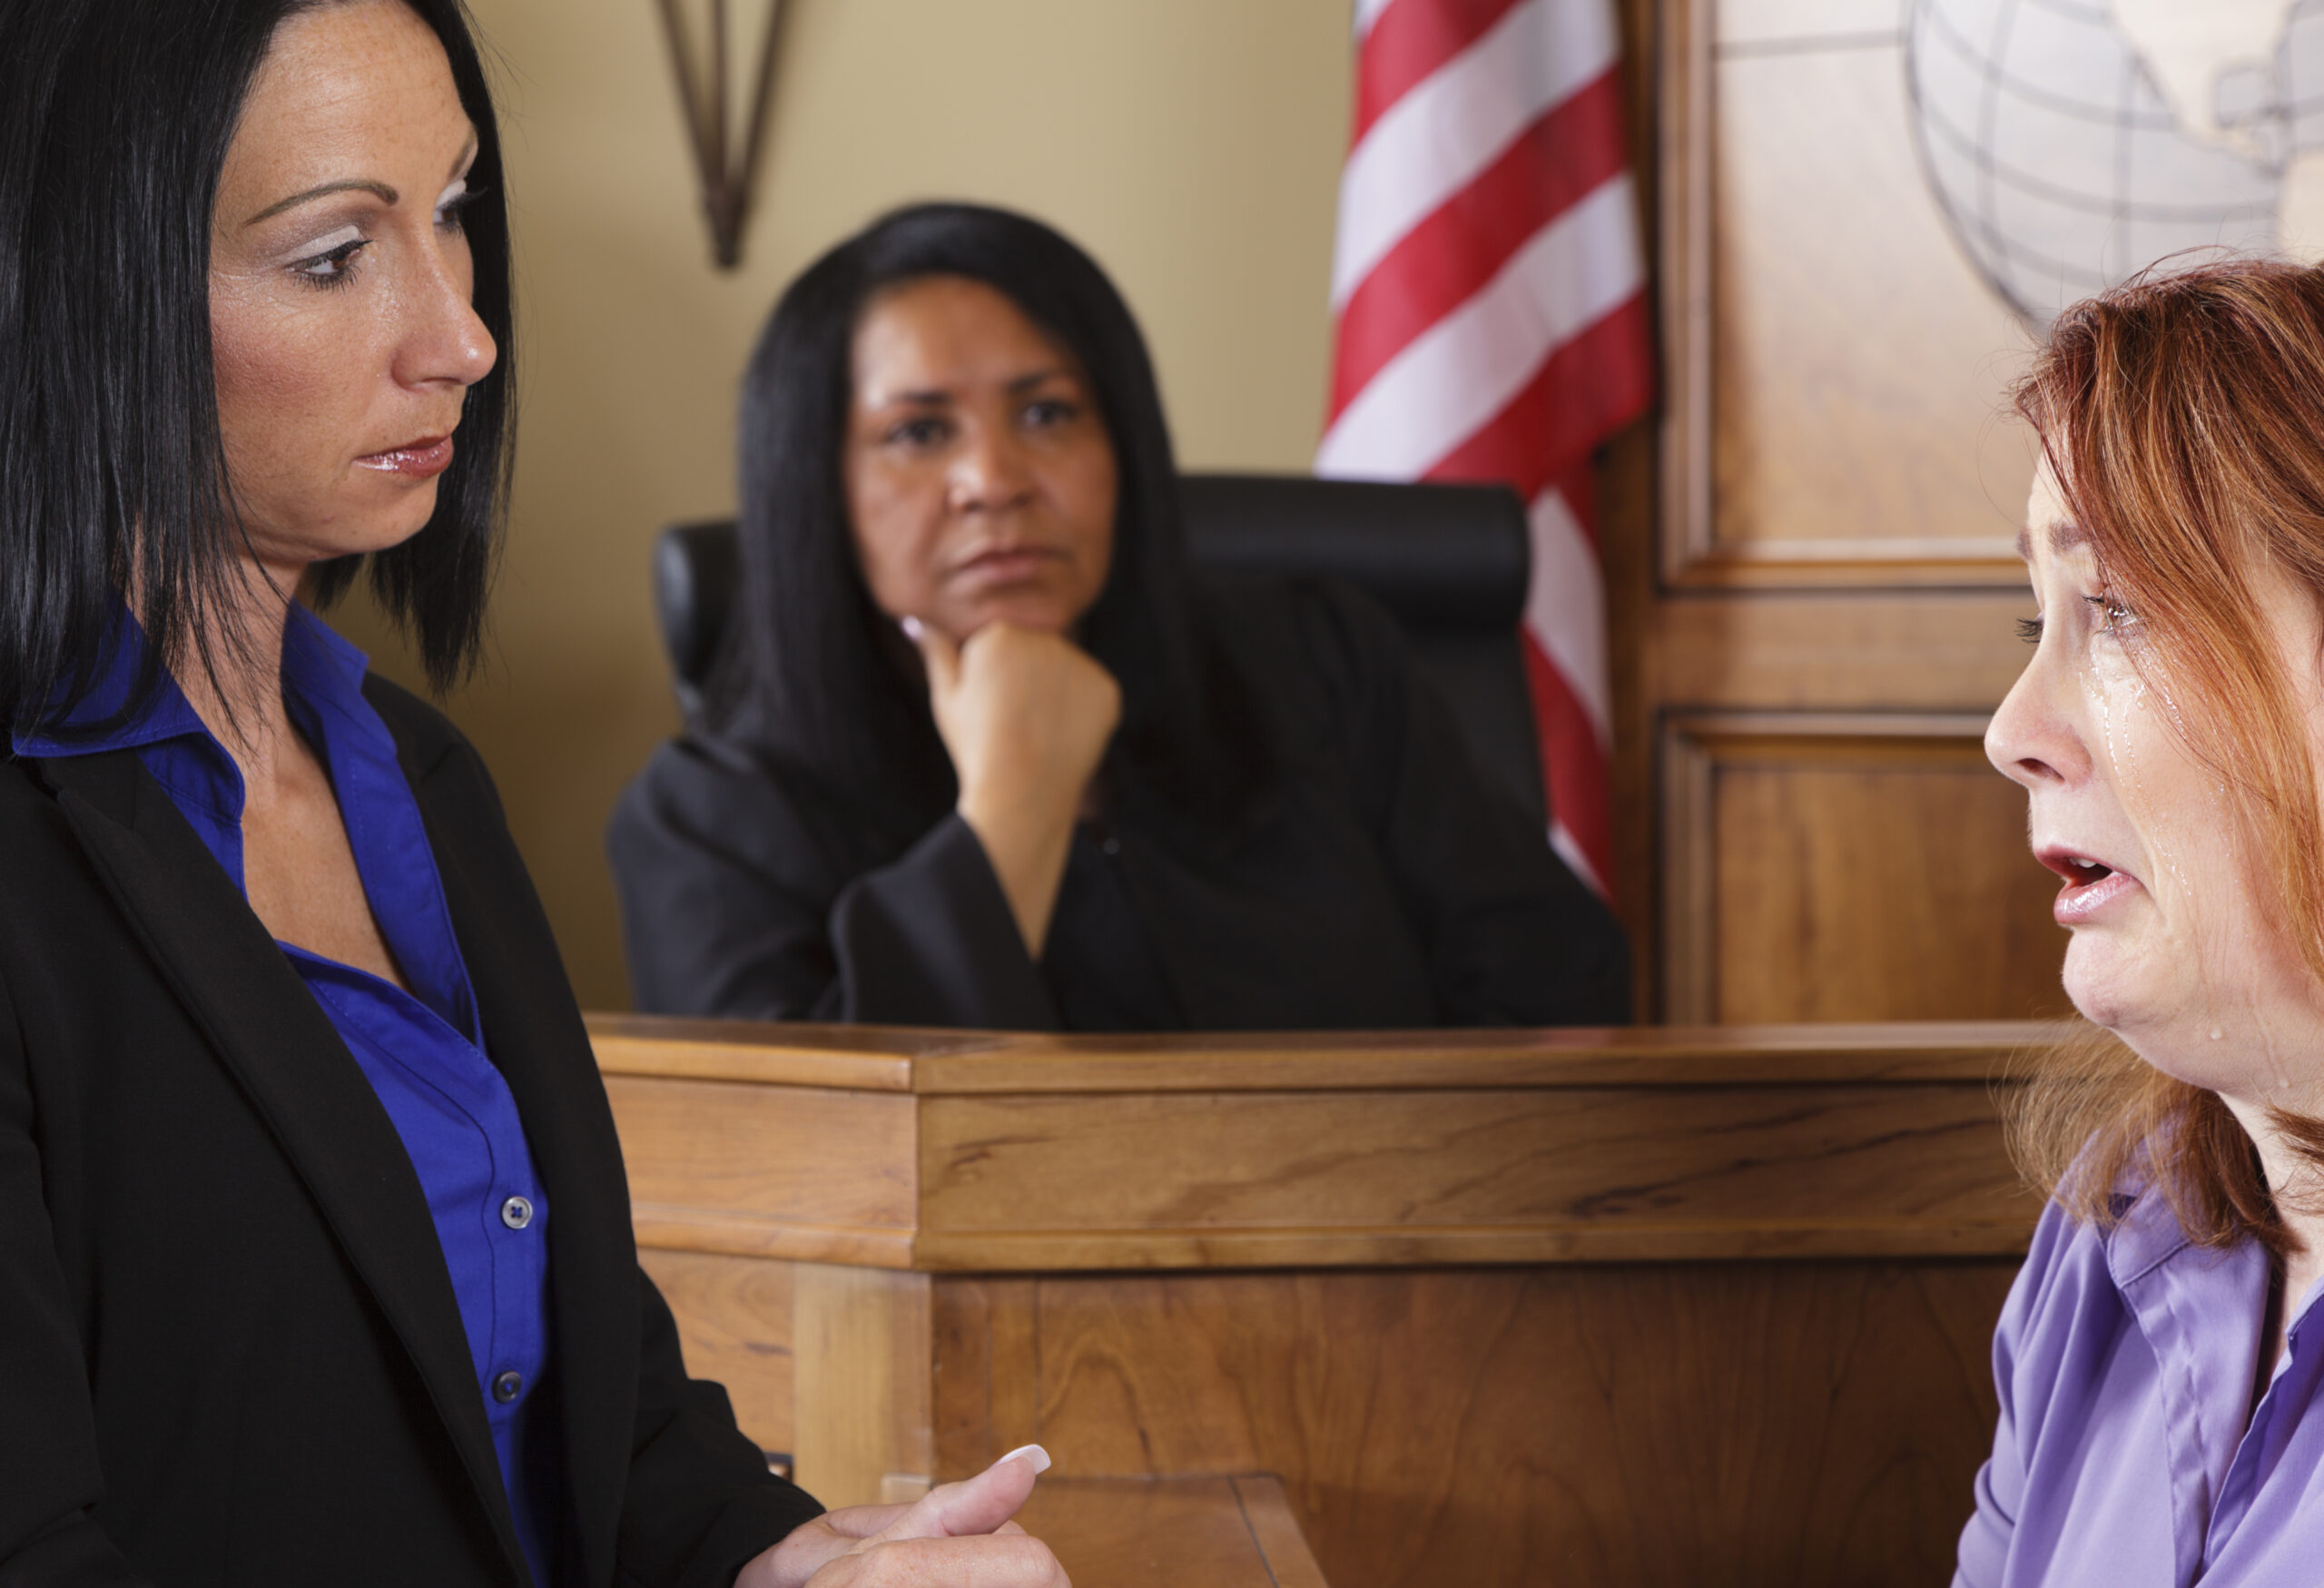 A crying witness in a courtroom with the judge in the out-of-focus background.